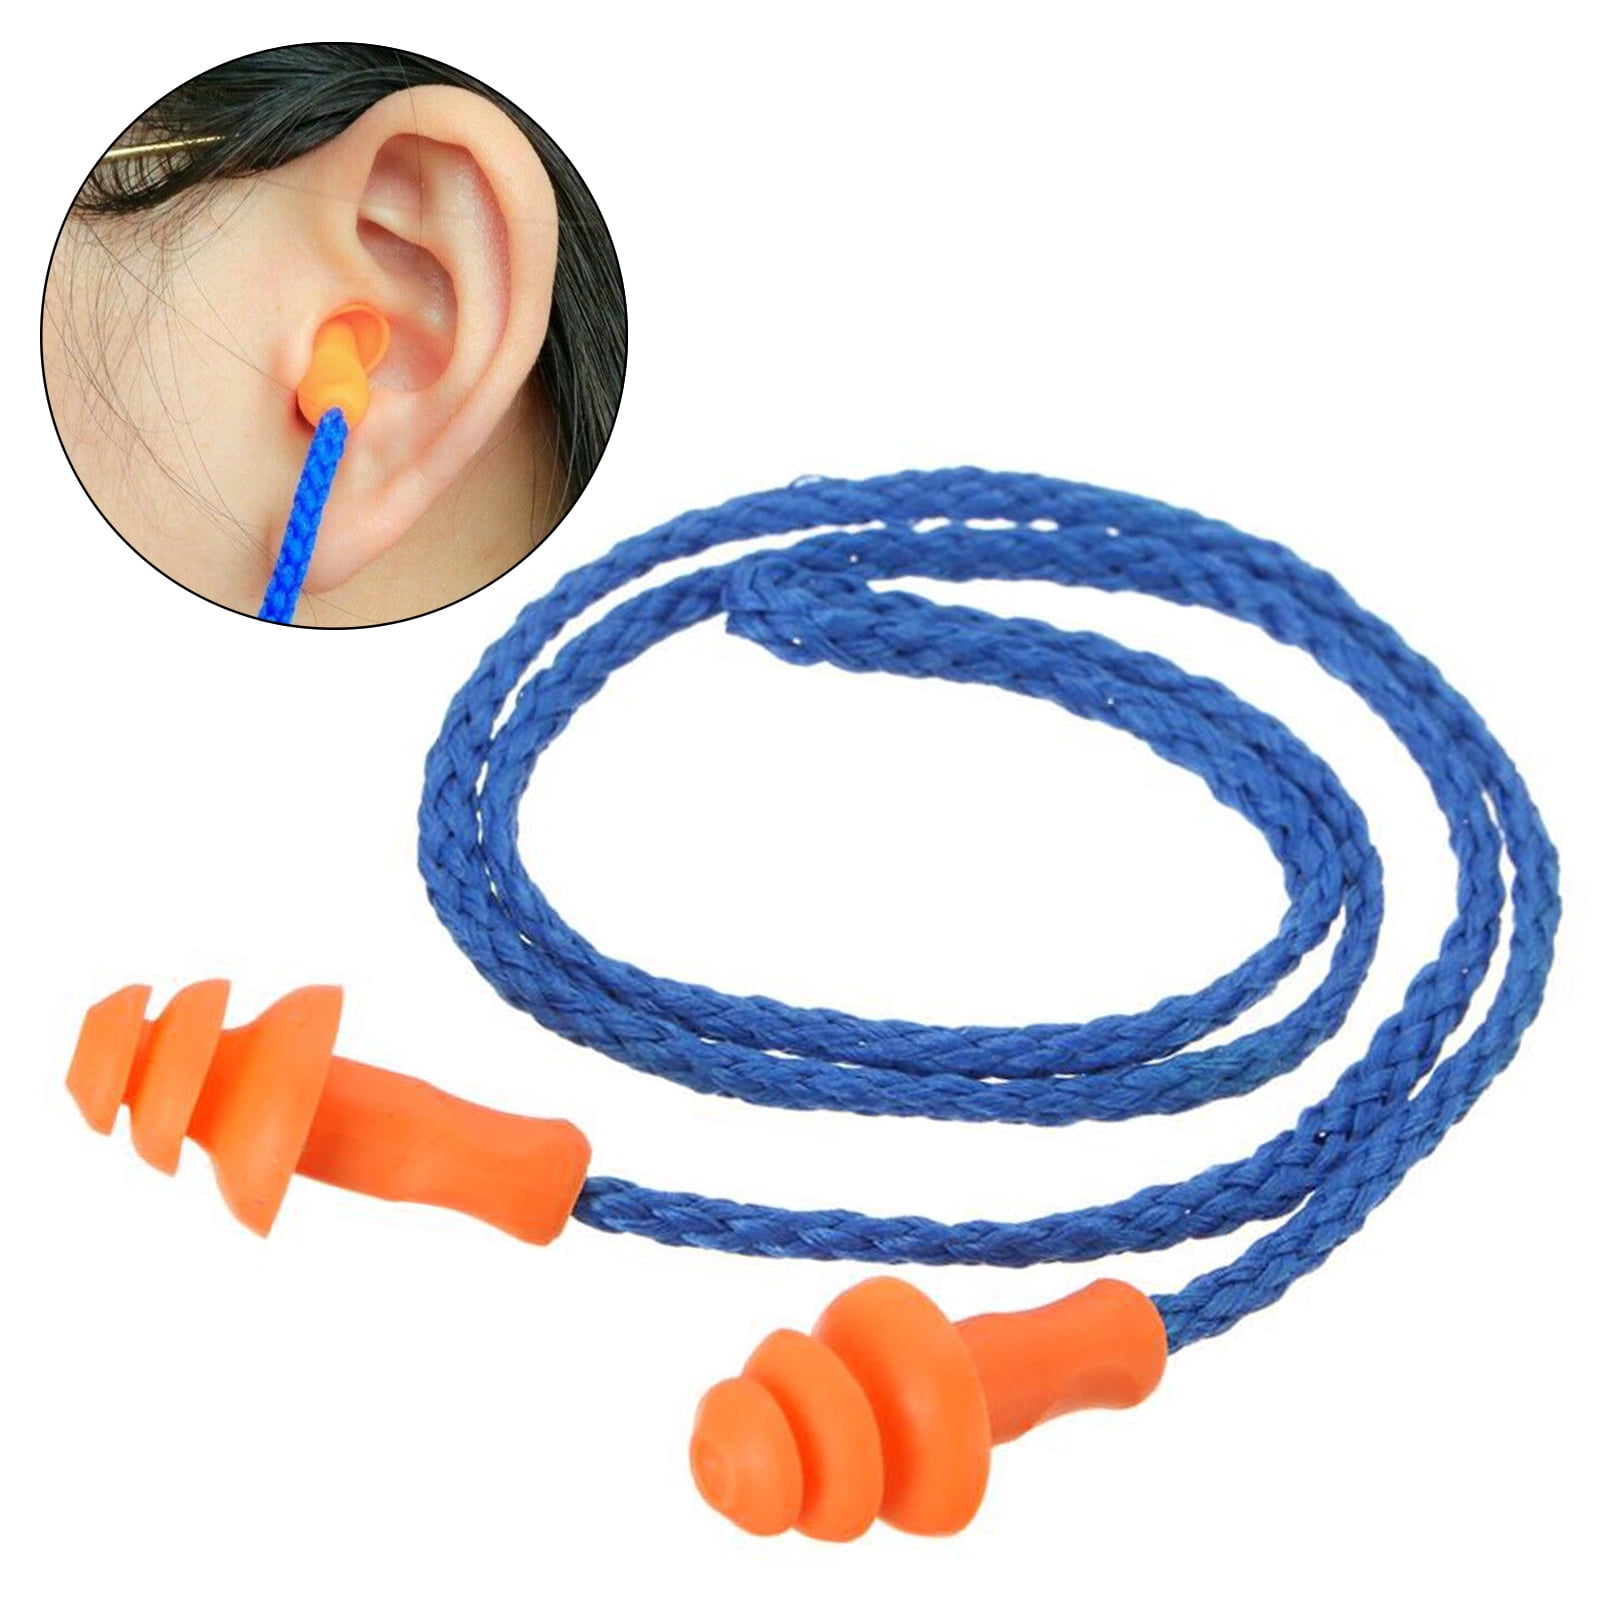 1 Pair of Soft Silicone swimming Ear Protection Plugs with String Cord Blue 